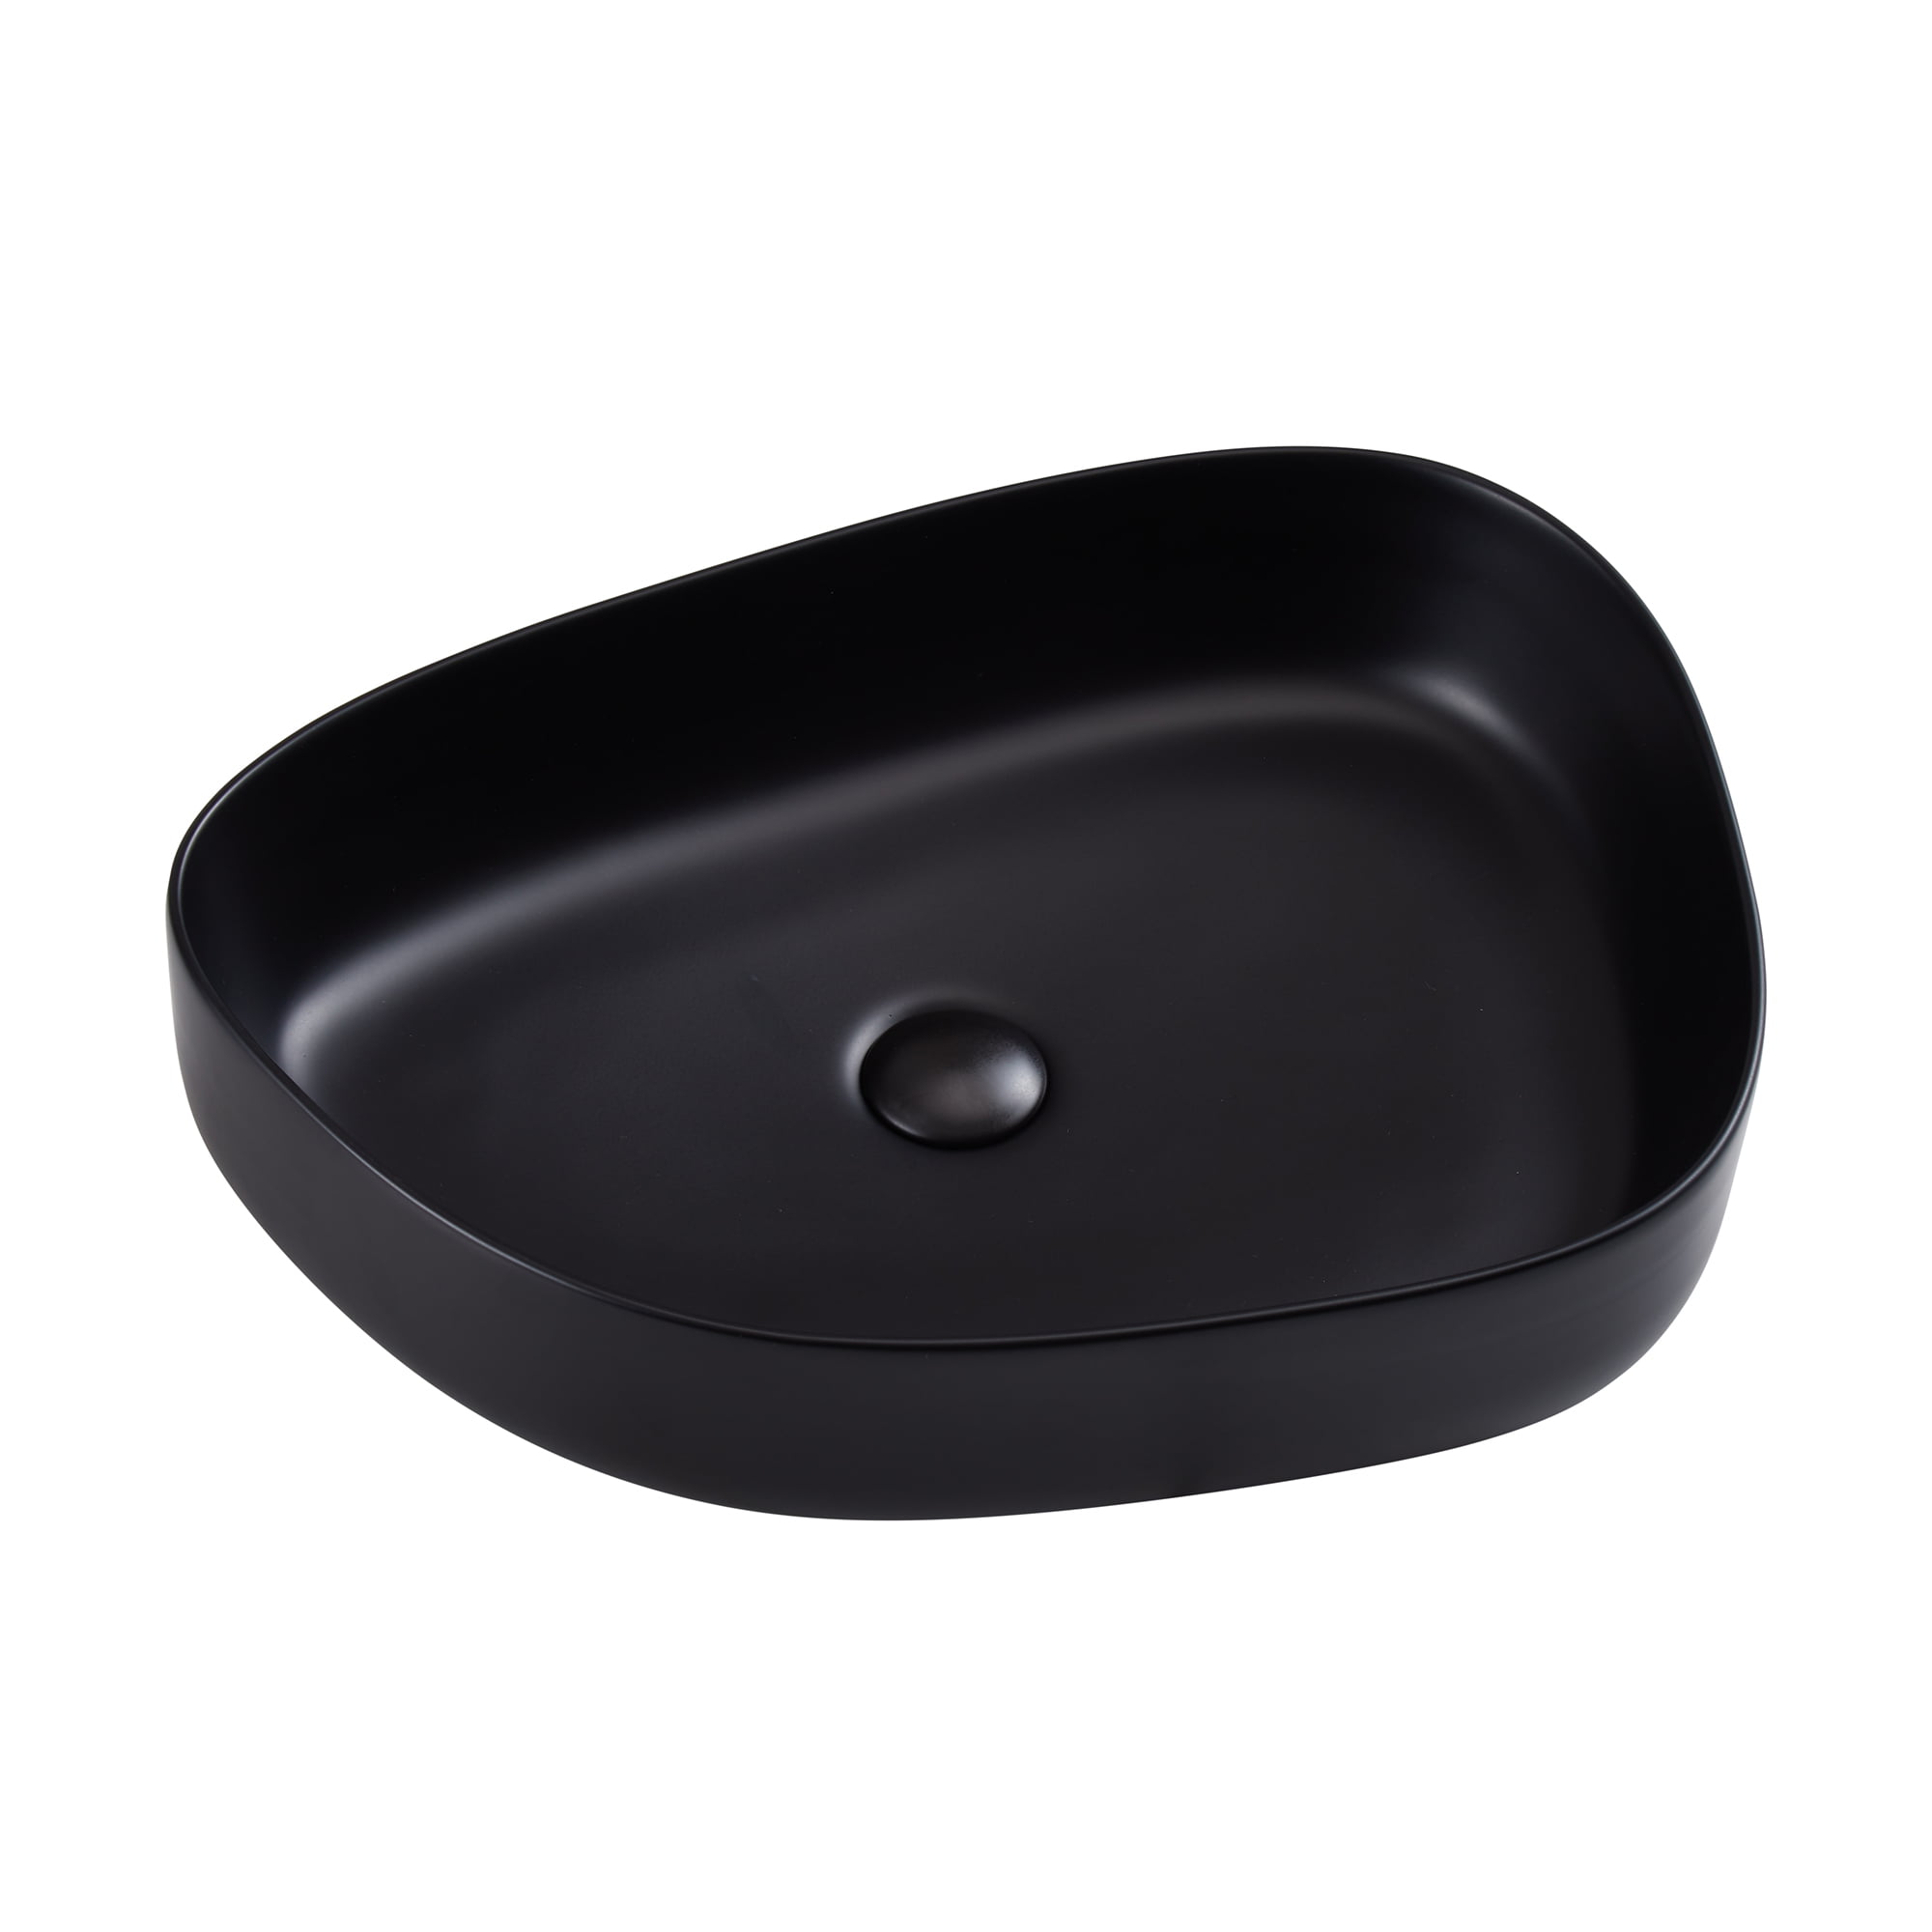 Details about   US  Ceramic Bathroom Vanity Vessel Sink Above Counter Basin Without Drain